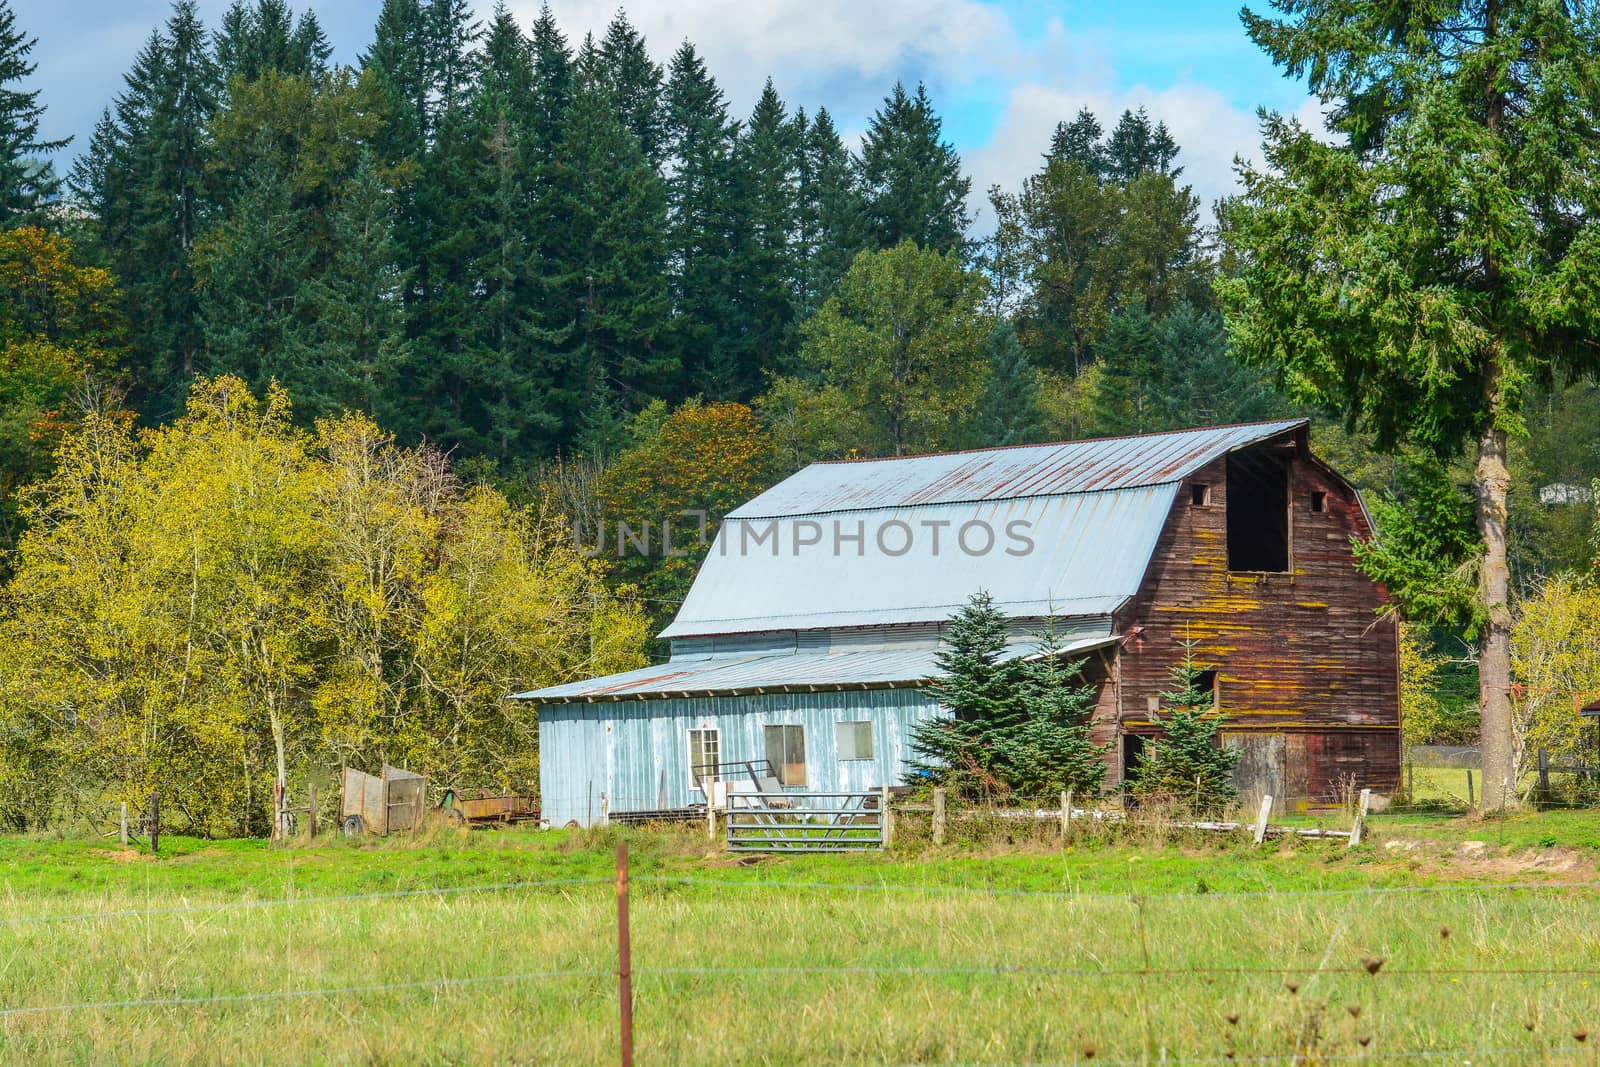 Weathered, but still functional Barn in the Skagit Valley of Washington State